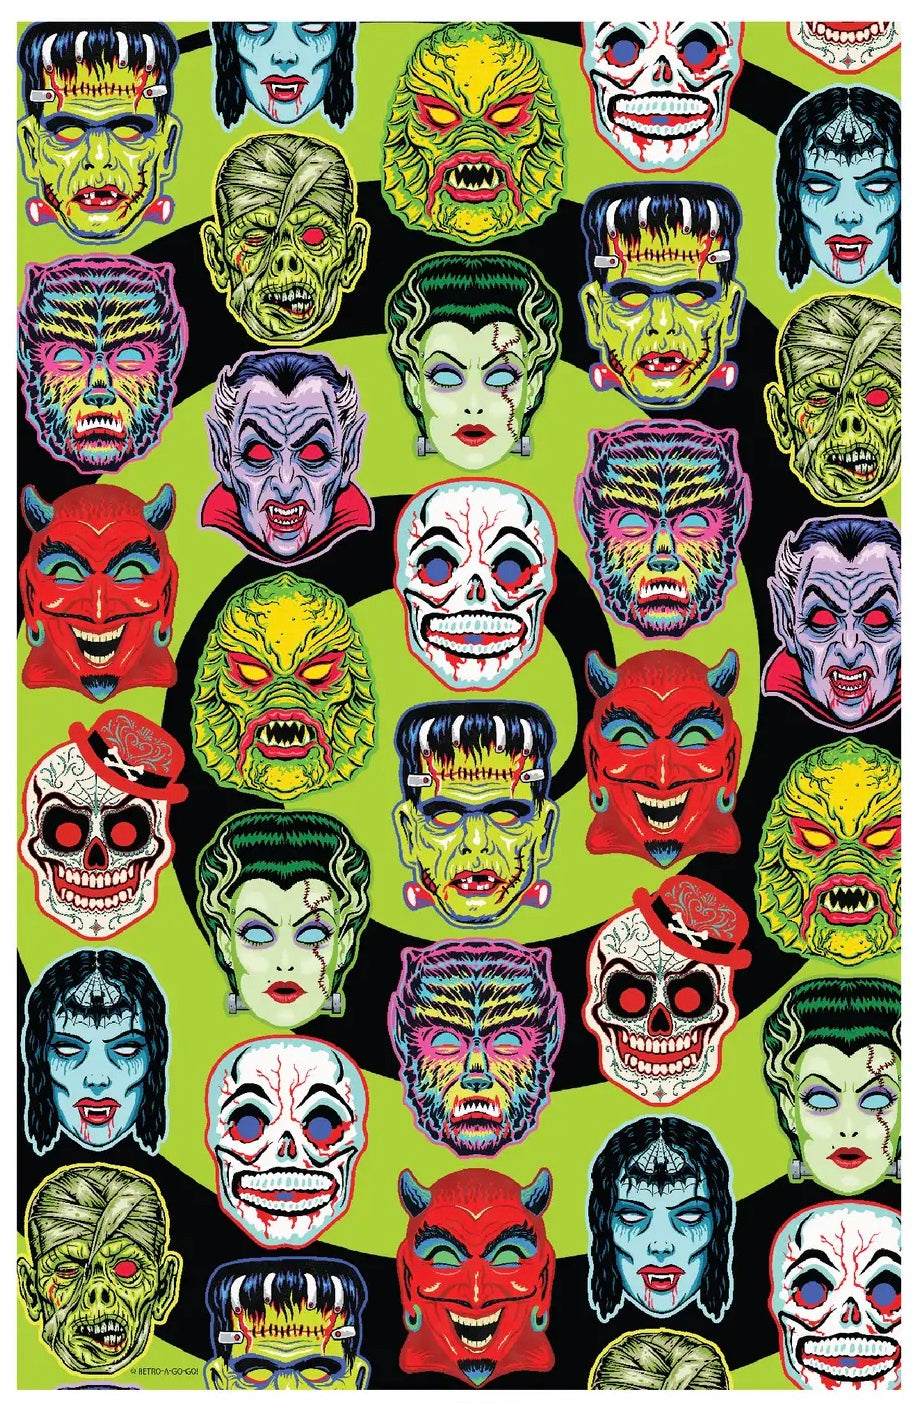 Throw blanket with all-over vibrantly colored print of retro Halloween monster masks on a swirled black and bright green background 